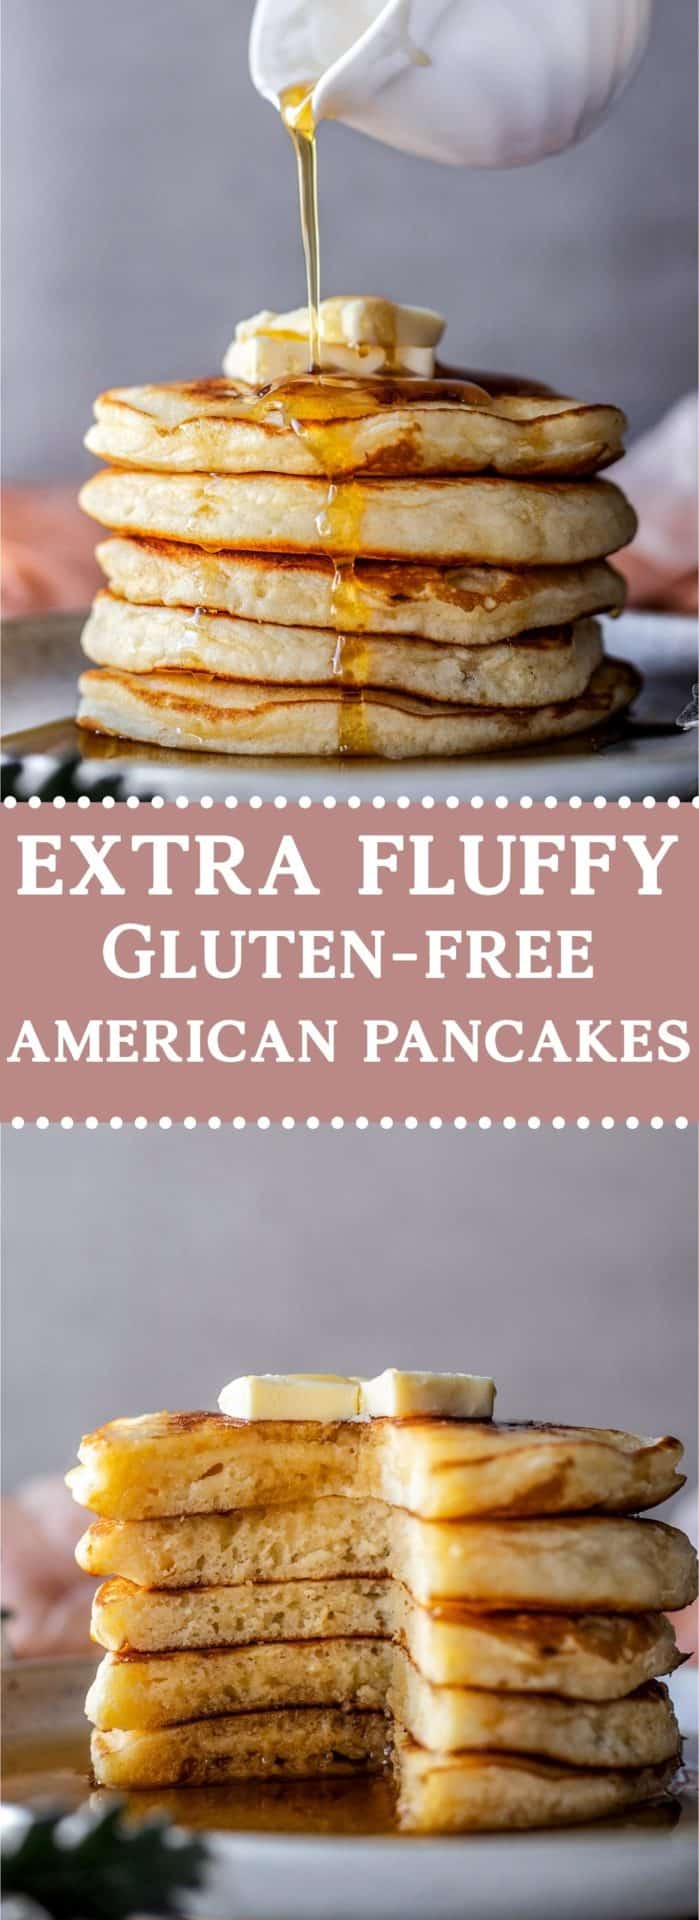 These Gluten-Free American Pancakes are buttery, soft, fluffy, super simple and easy to make, FODMAP friendly and just so good!